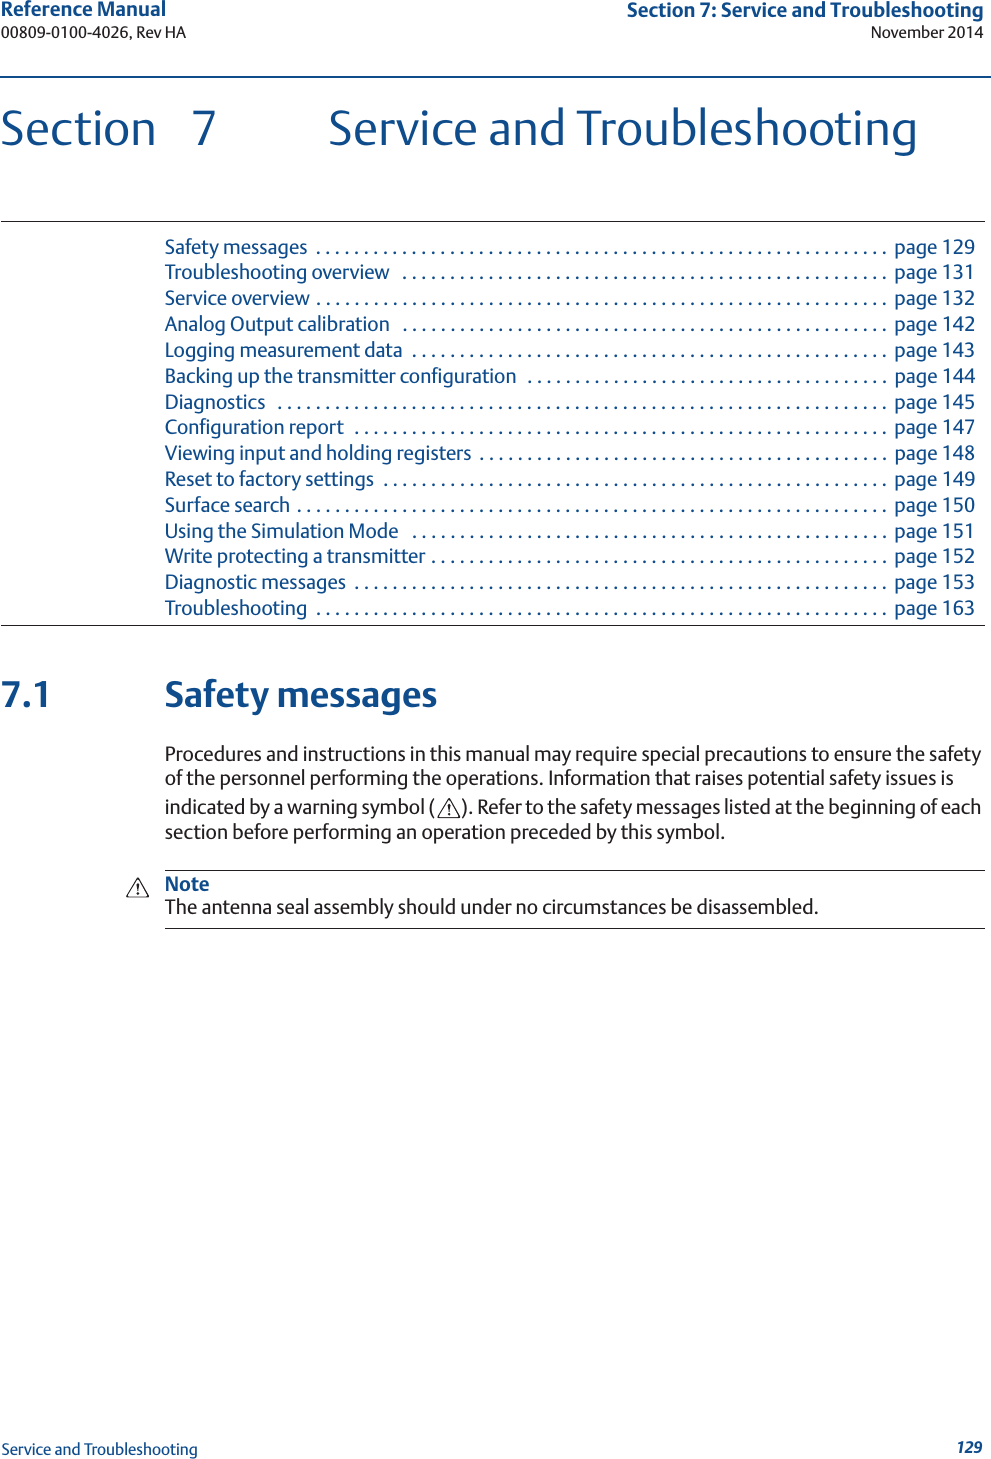 129Reference Manual 00809-0100-4026, Rev HASection 7: Service and TroubleshootingNovember 2014Service and TroubleshootingSection  7 Service and TroubleshootingSafety messages  . . . . . . . . . . . . . . . . . . . . . . . . . . . . . . . . . . . . . . . . . . . . . . . . . . . . . . . . . . . . page 129Troubleshooting overview   . . . . . . . . . . . . . . . . . . . . . . . . . . . . . . . . . . . . . . . . . . . . . . . . . . . page 131Service overview . . . . . . . . . . . . . . . . . . . . . . . . . . . . . . . . . . . . . . . . . . . . . . . . . . . . . . . . . . . .  page 132Analog Output calibration   . . . . . . . . . . . . . . . . . . . . . . . . . . . . . . . . . . . . . . . . . . . . . . . . . . . page 142Logging measurement data  . . . . . . . . . . . . . . . . . . . . . . . . . . . . . . . . . . . . . . . . . . . . . . . . . .  page 143Backing up the transmitter configuration  . . . . . . . . . . . . . . . . . . . . . . . . . . . . . . . . . . . . . .  page 144Diagnostics   . . . . . . . . . . . . . . . . . . . . . . . . . . . . . . . . . . . . . . . . . . . . . . . . . . . . . . . . . . . . . . . .  page 145Configuration report  . . . . . . . . . . . . . . . . . . . . . . . . . . . . . . . . . . . . . . . . . . . . . . . . . . . . . . . .  page 147Viewing input and holding registers  . . . . . . . . . . . . . . . . . . . . . . . . . . . . . . . . . . . . . . . . . . . page 148Reset to factory settings  . . . . . . . . . . . . . . . . . . . . . . . . . . . . . . . . . . . . . . . . . . . . . . . . . . . . . page 149Surface search . . . . . . . . . . . . . . . . . . . . . . . . . . . . . . . . . . . . . . . . . . . . . . . . . . . . . . . . . . . . . .  page 150Using the Simulation Mode   . . . . . . . . . . . . . . . . . . . . . . . . . . . . . . . . . . . . . . . . . . . . . . . . . .  page 151Write protecting a transmitter . . . . . . . . . . . . . . . . . . . . . . . . . . . . . . . . . . . . . . . . . . . . . . . .  page 152Diagnostic messages  . . . . . . . . . . . . . . . . . . . . . . . . . . . . . . . . . . . . . . . . . . . . . . . . . . . . . . . .  page 153Troubleshooting  . . . . . . . . . . . . . . . . . . . . . . . . . . . . . . . . . . . . . . . . . . . . . . . . . . . . . . . . . . . .  page 1637.1 Safety messagesProcedures and instructions in this manual may require special precautions to ensure the safety of the personnel performing the operations. Information that raises potential safety issues is indicated by a warning symbol ( ). Refer to the safety messages listed at the beginning of each section before performing an operation preceded by this symbol.NoteThe antenna seal assembly should under no circumstances be disassembled.